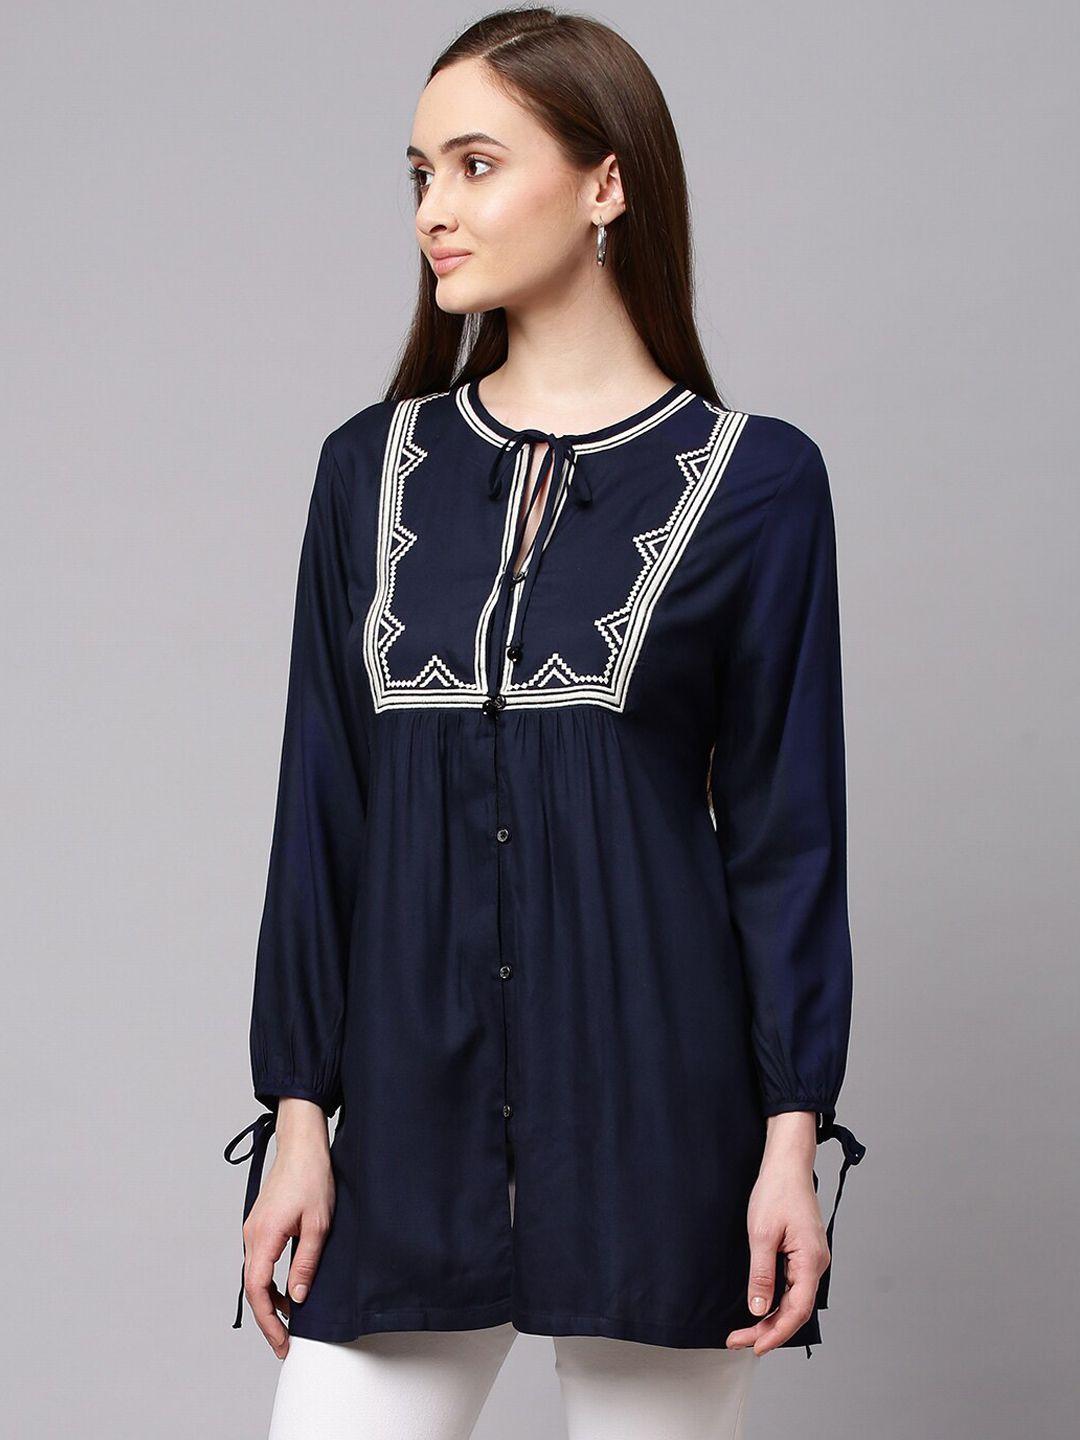 modern indian by chemistry navy blue & white yoke embroidered pleated straight kurti